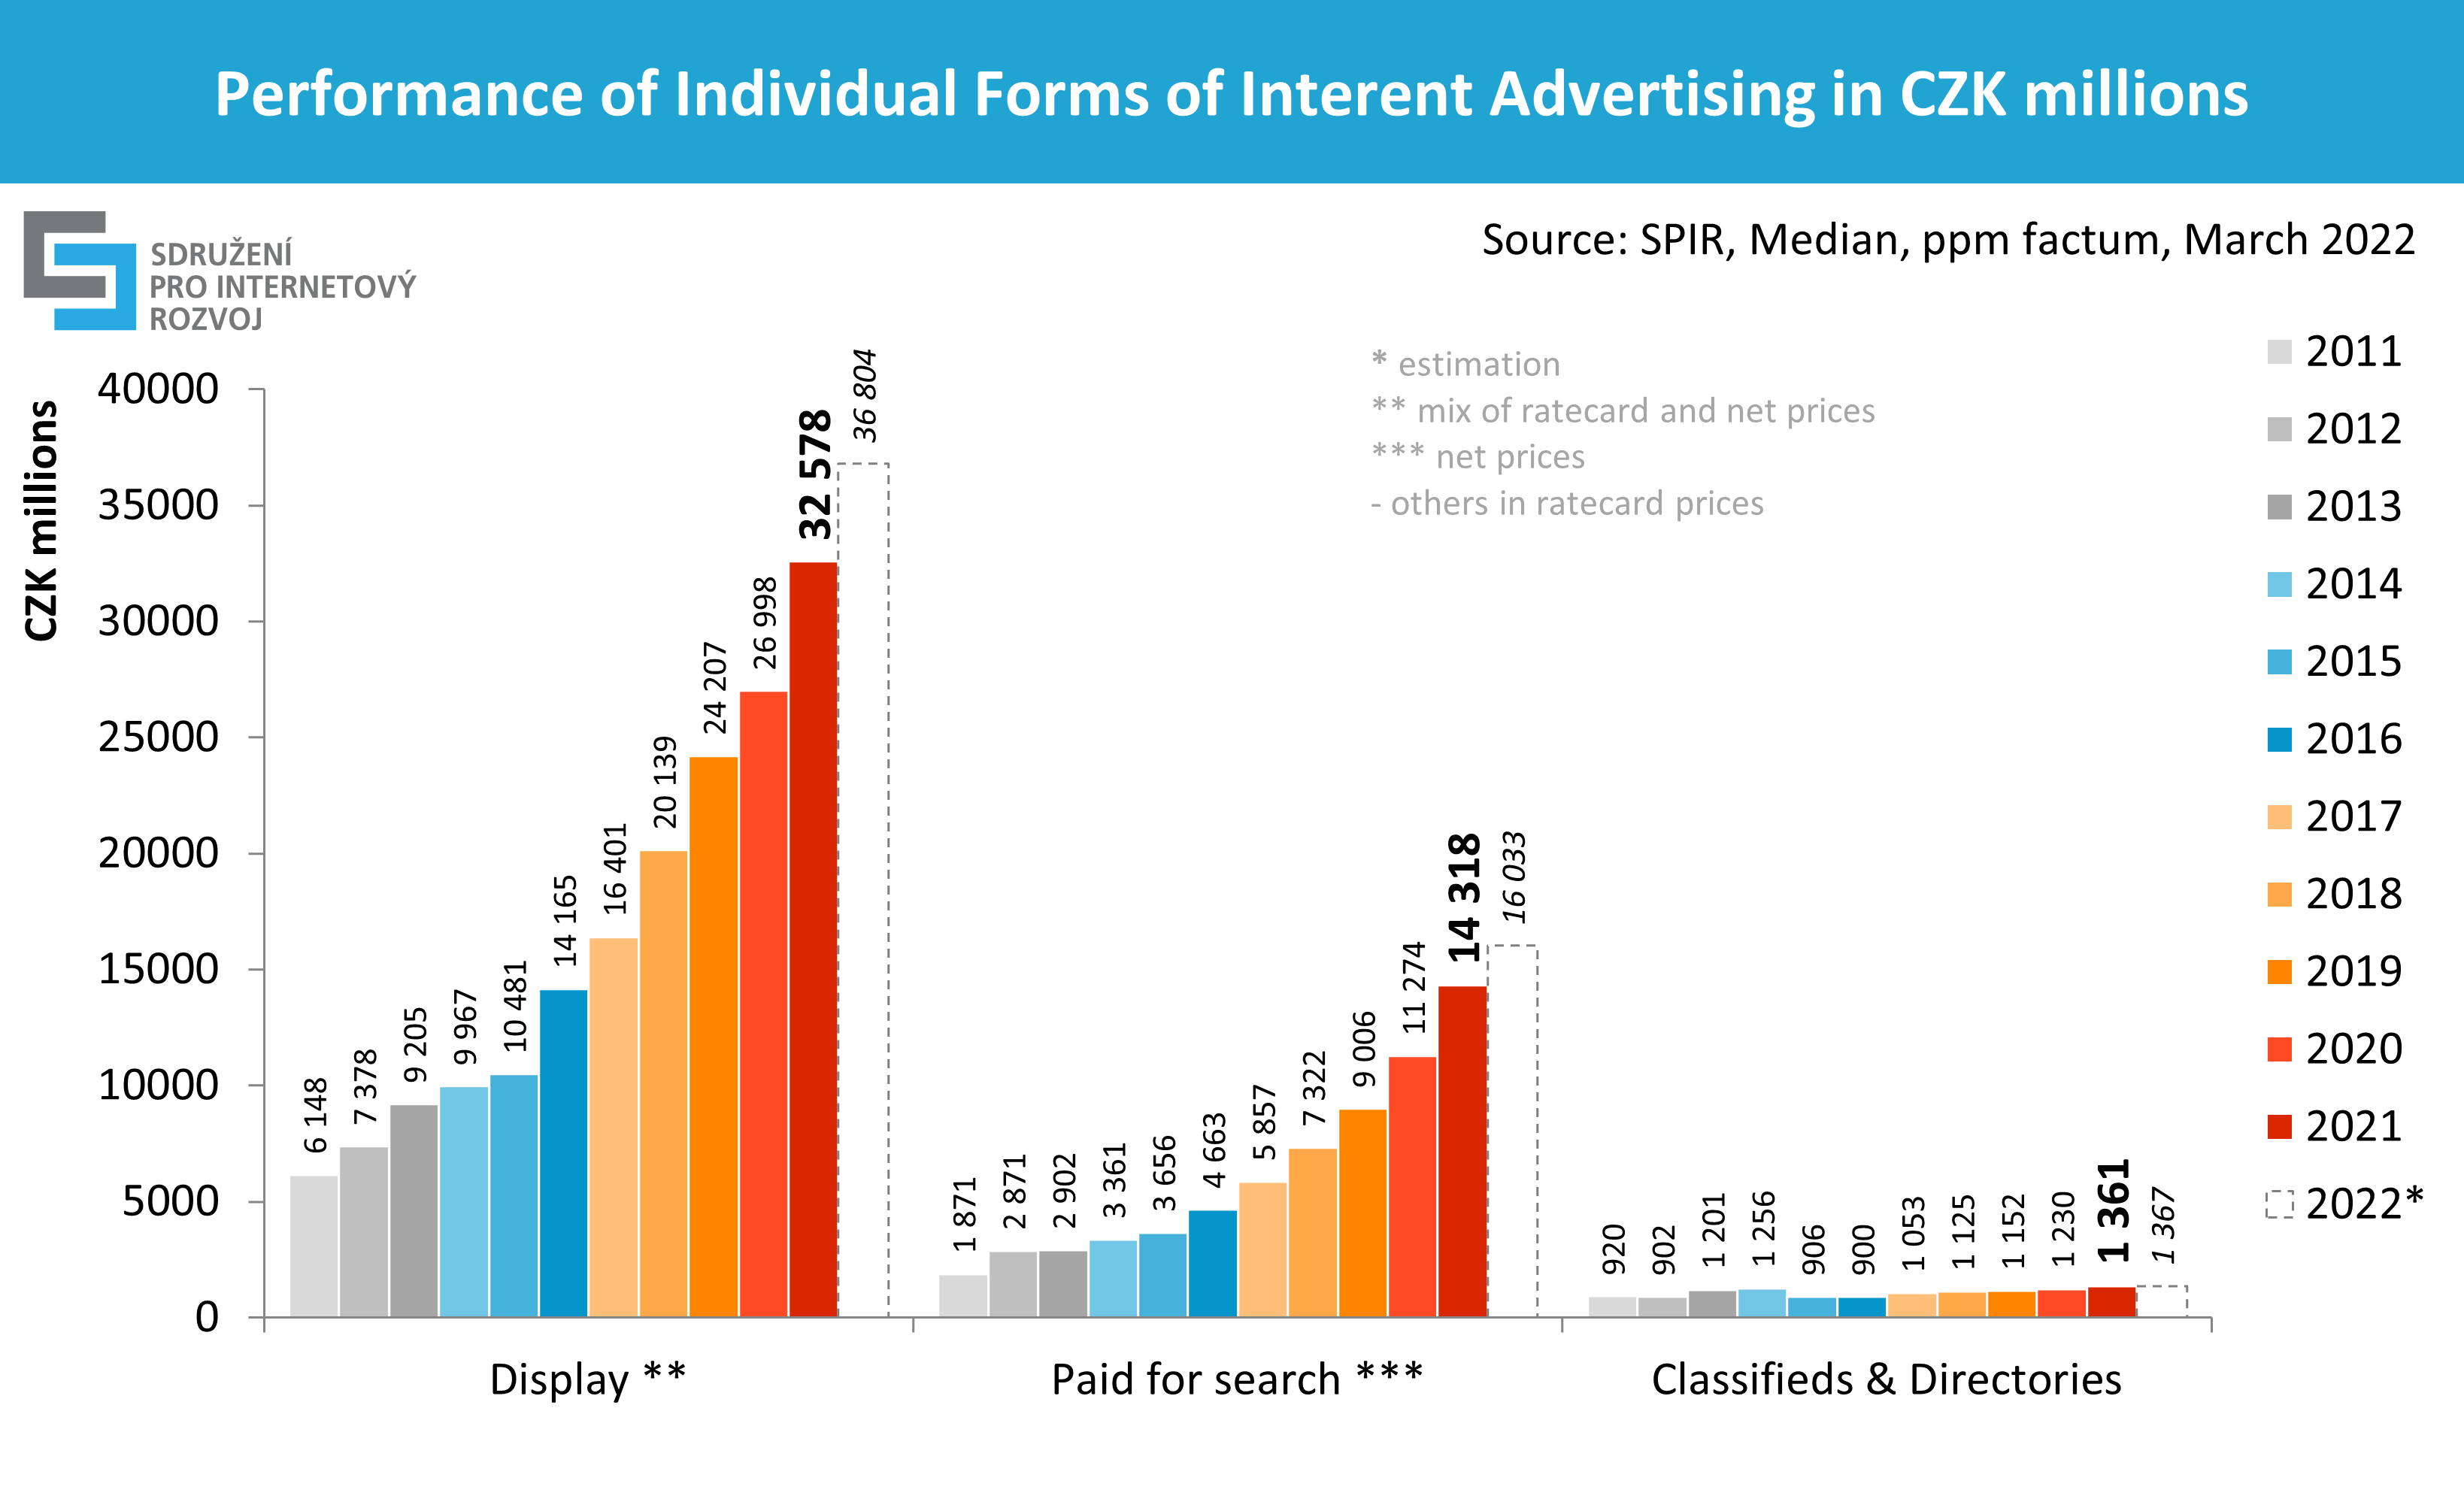 Performance of individual forms of Internet advertising